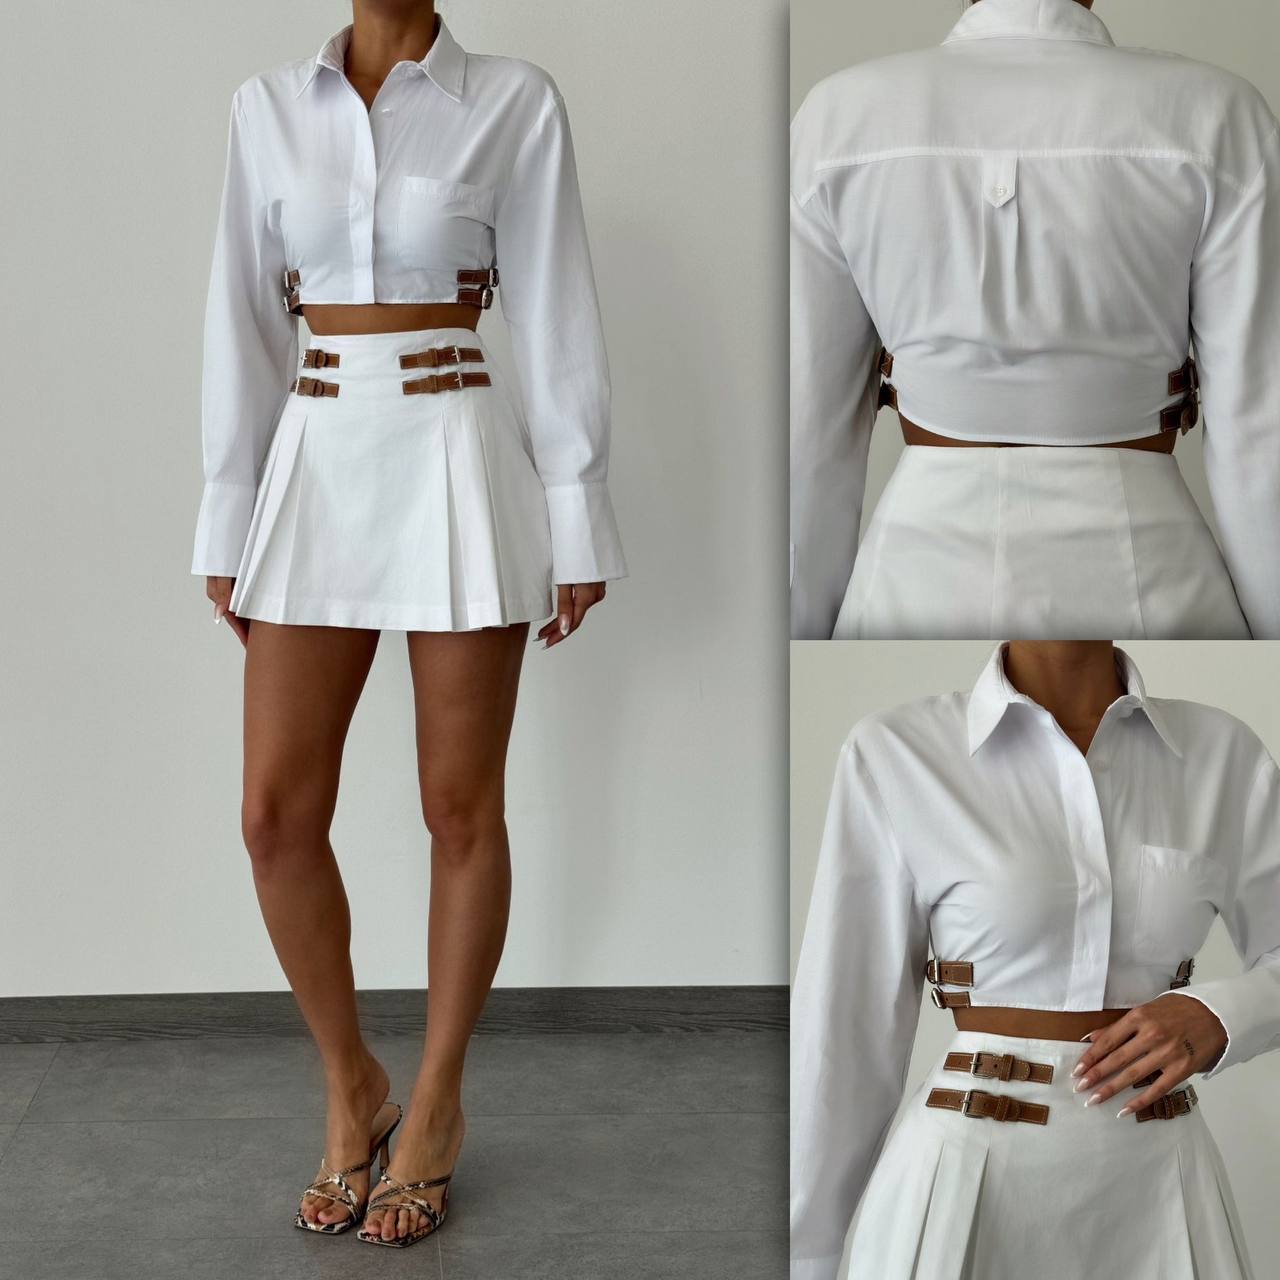 Pleated Mini Short Skirt with Belt Accessory - White - LussoCA